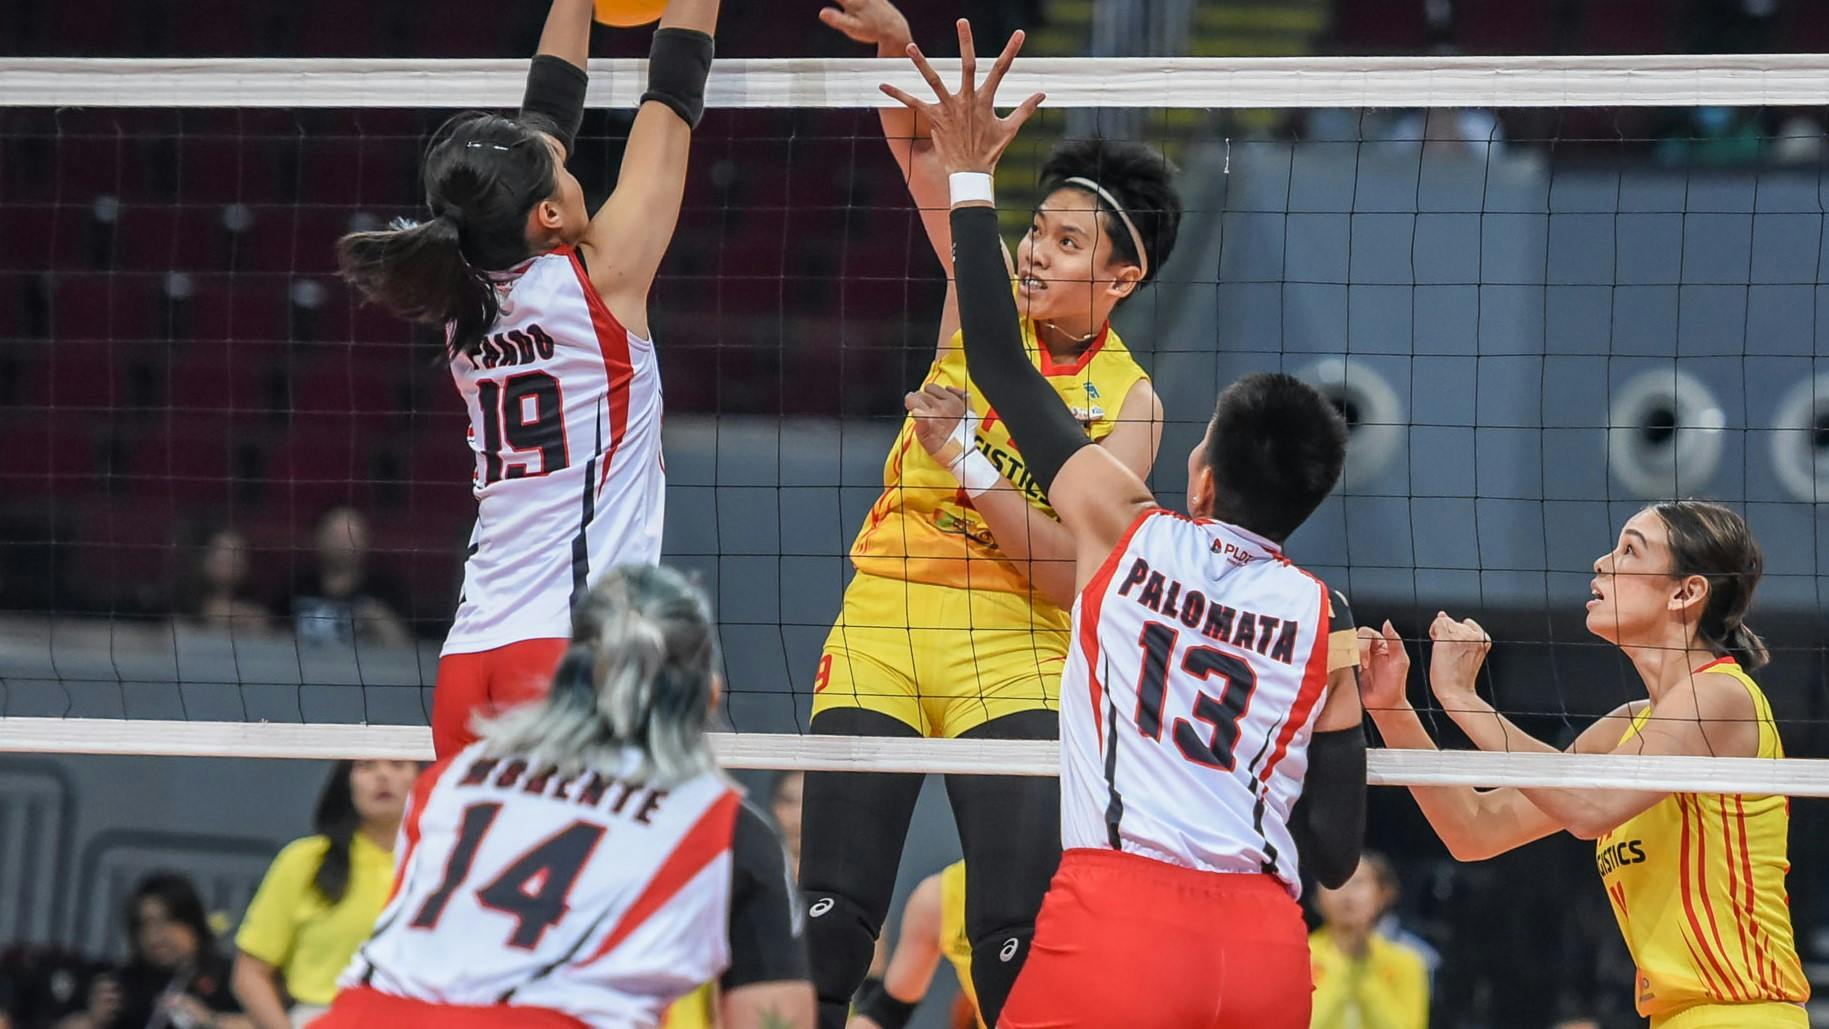 PVL podium finish by F2 proved one thing to decorated setter Kim Fajardo